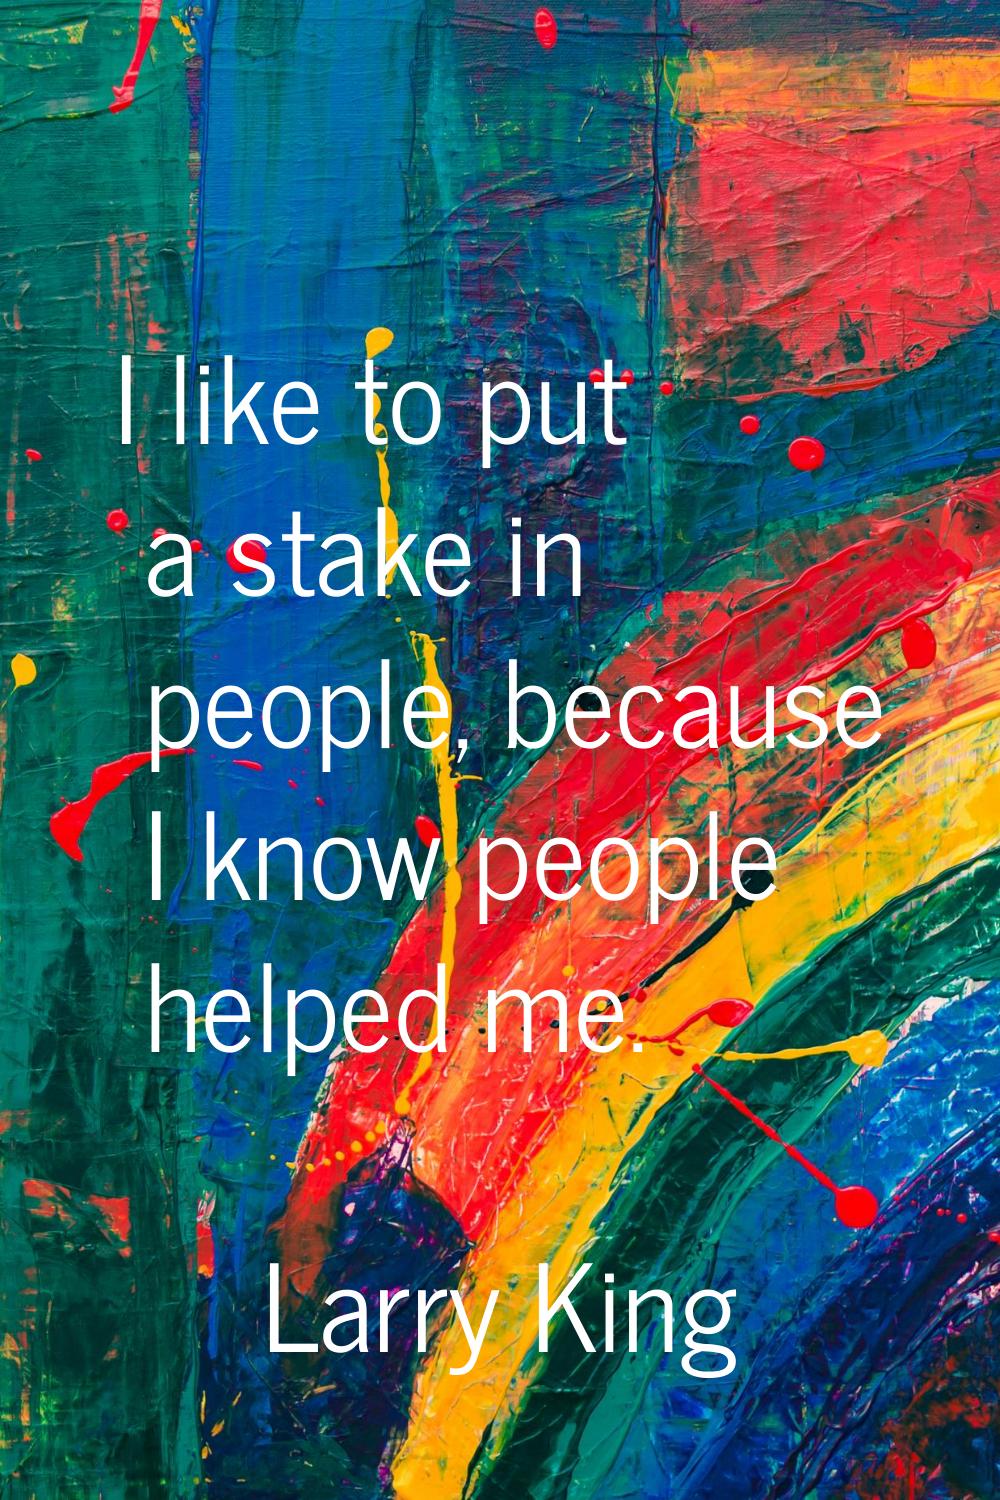 I like to put a stake in people, because I know people helped me.